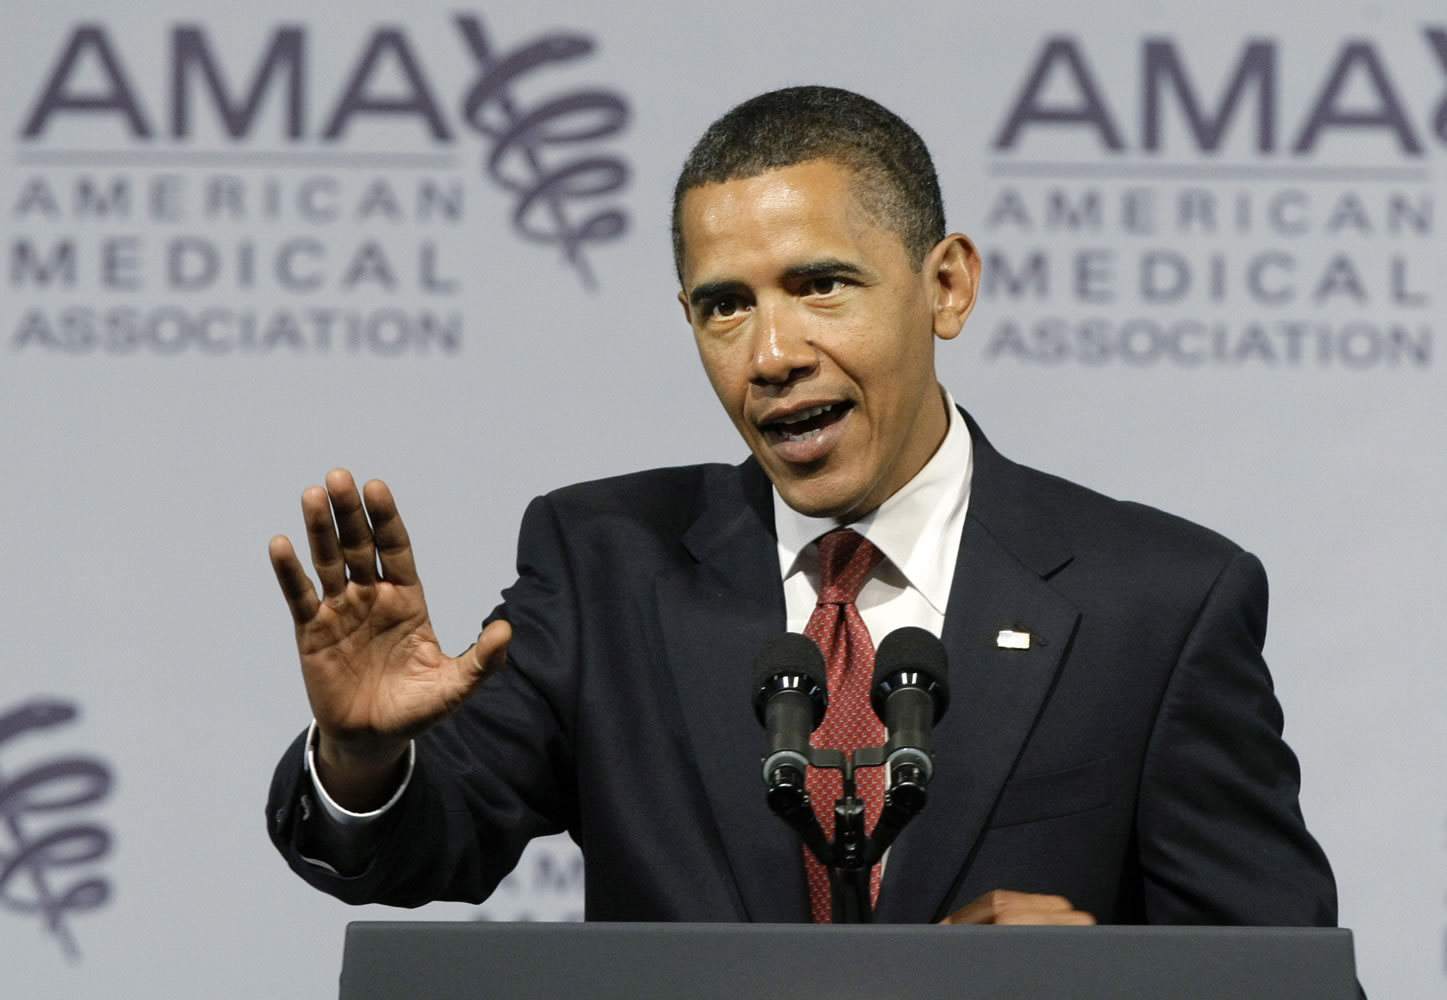 President Barack Obama speaks at the American Medical Association annual meeting in 2009 in Chicago.